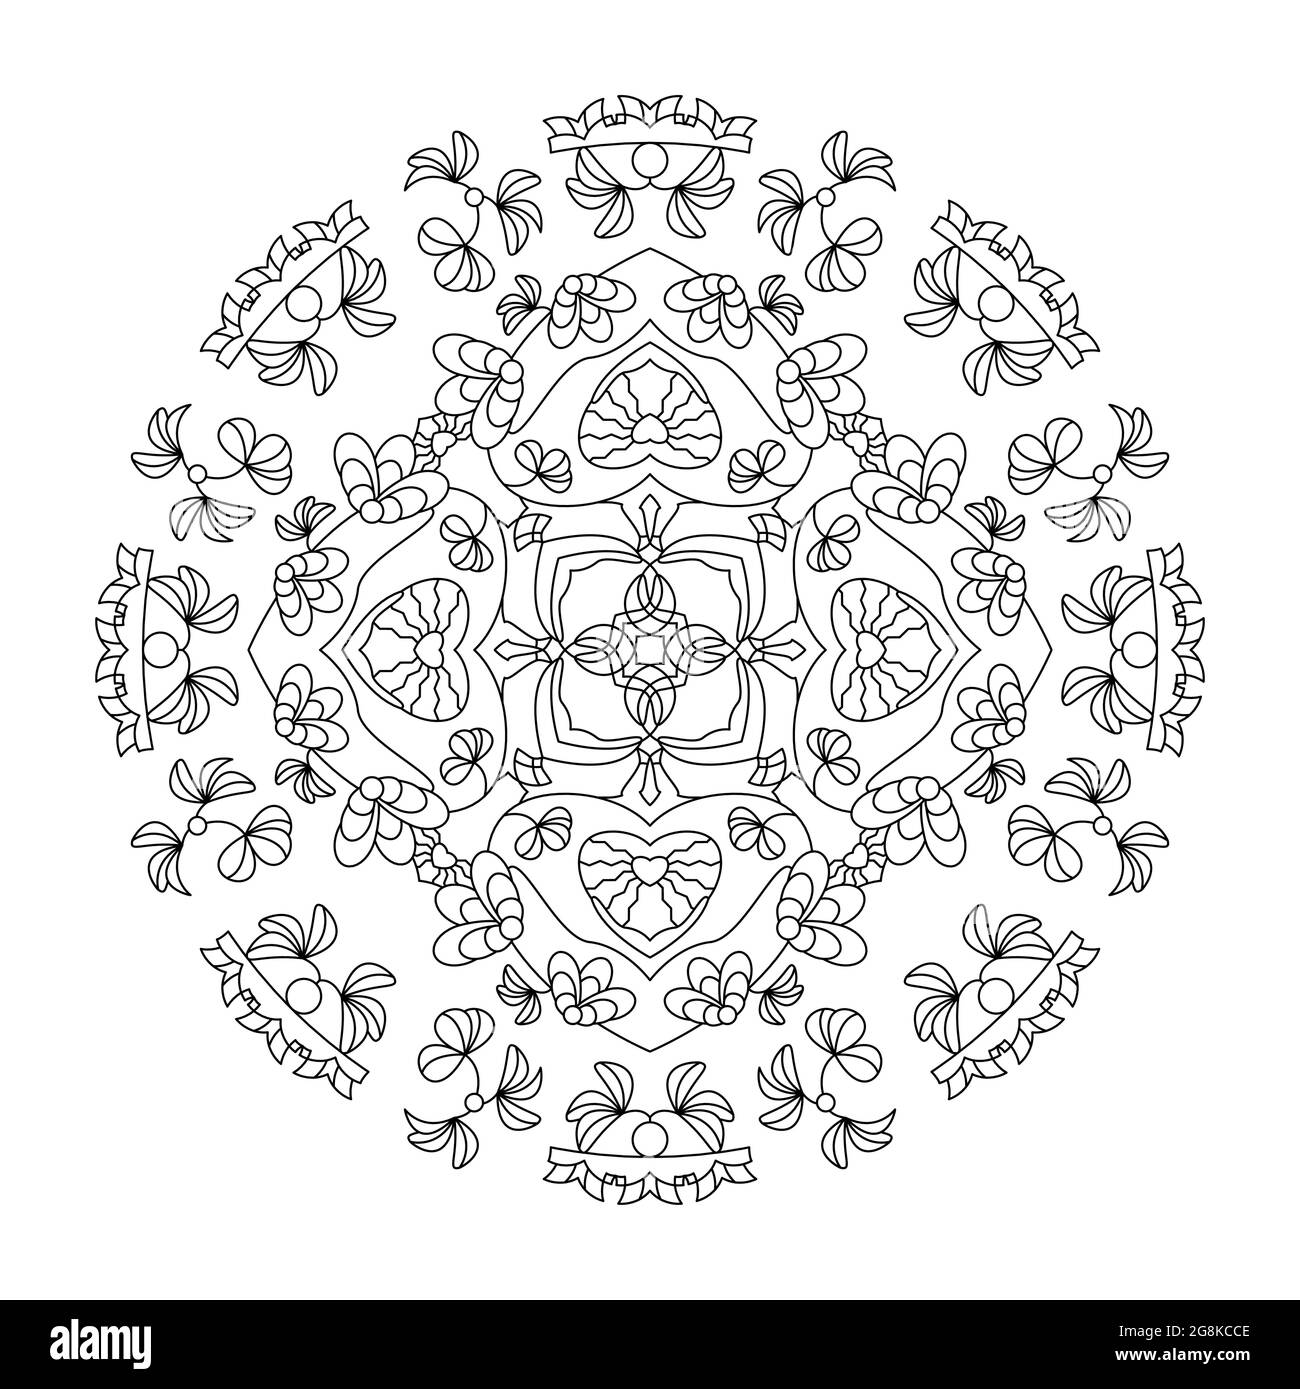 Mandala. Hearts and leaves. Anti-stress coloring page. Vector illustration black and white. Stock Vector